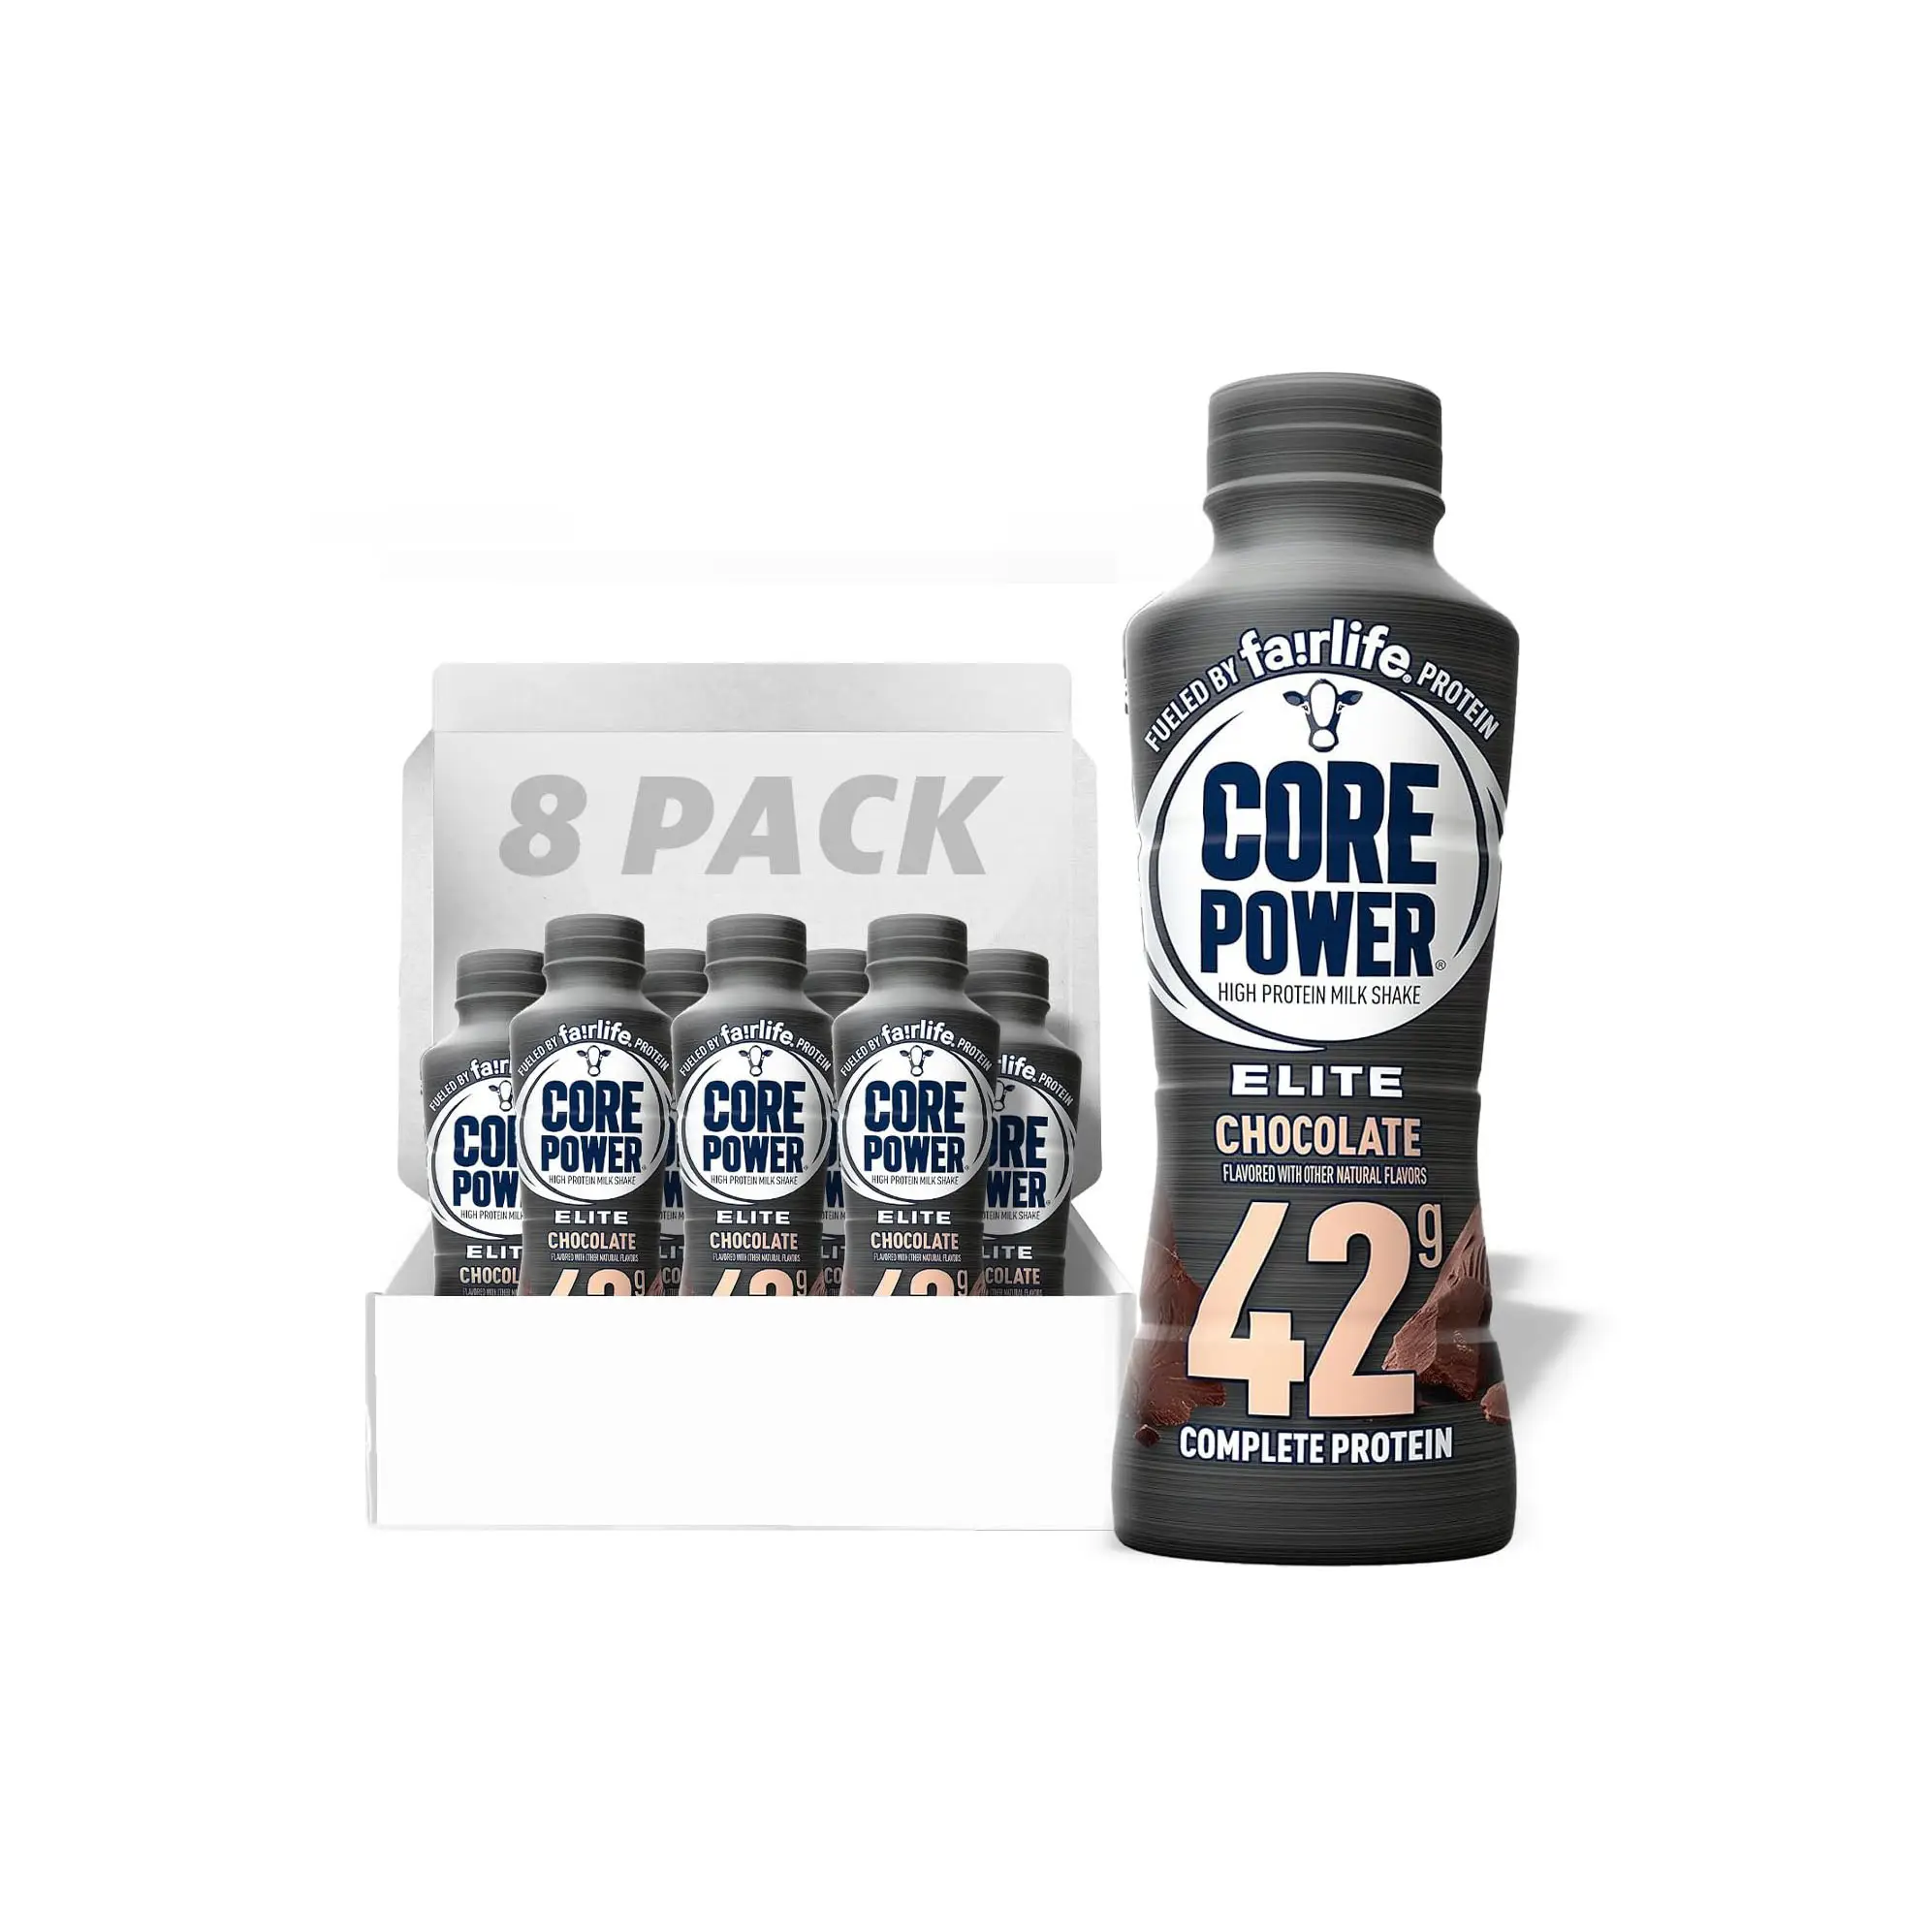 Fairlife Core Power Elite 42g High Protein Milk Shake Ready To Drink Chocolate